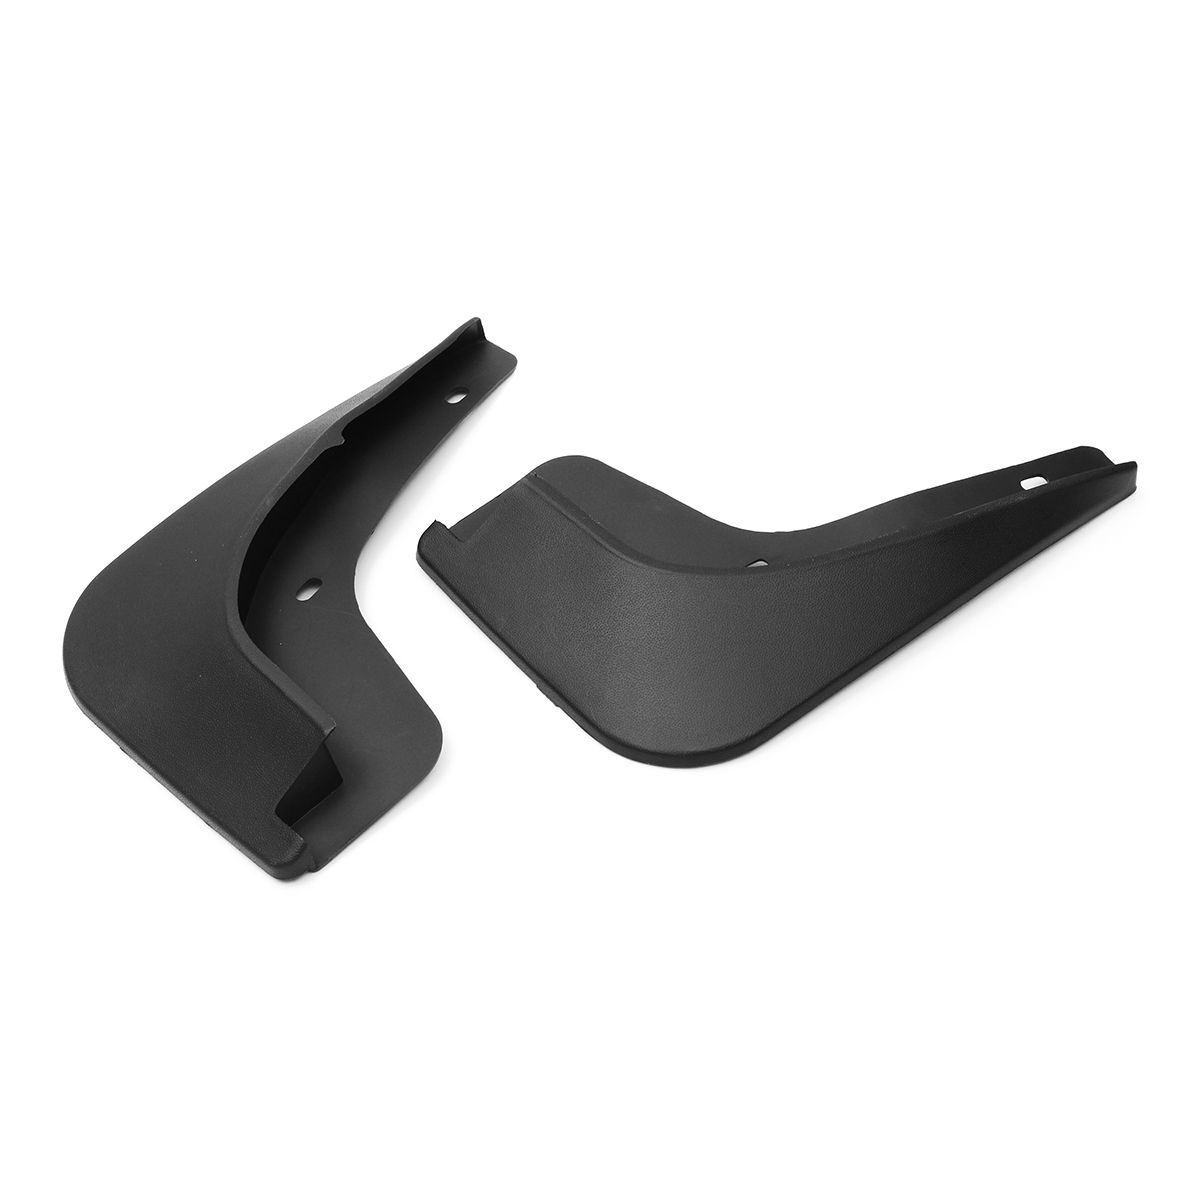 Car-Mudguards-Flaps-For-Smart-453-Fortwo-2016-2018-1388936